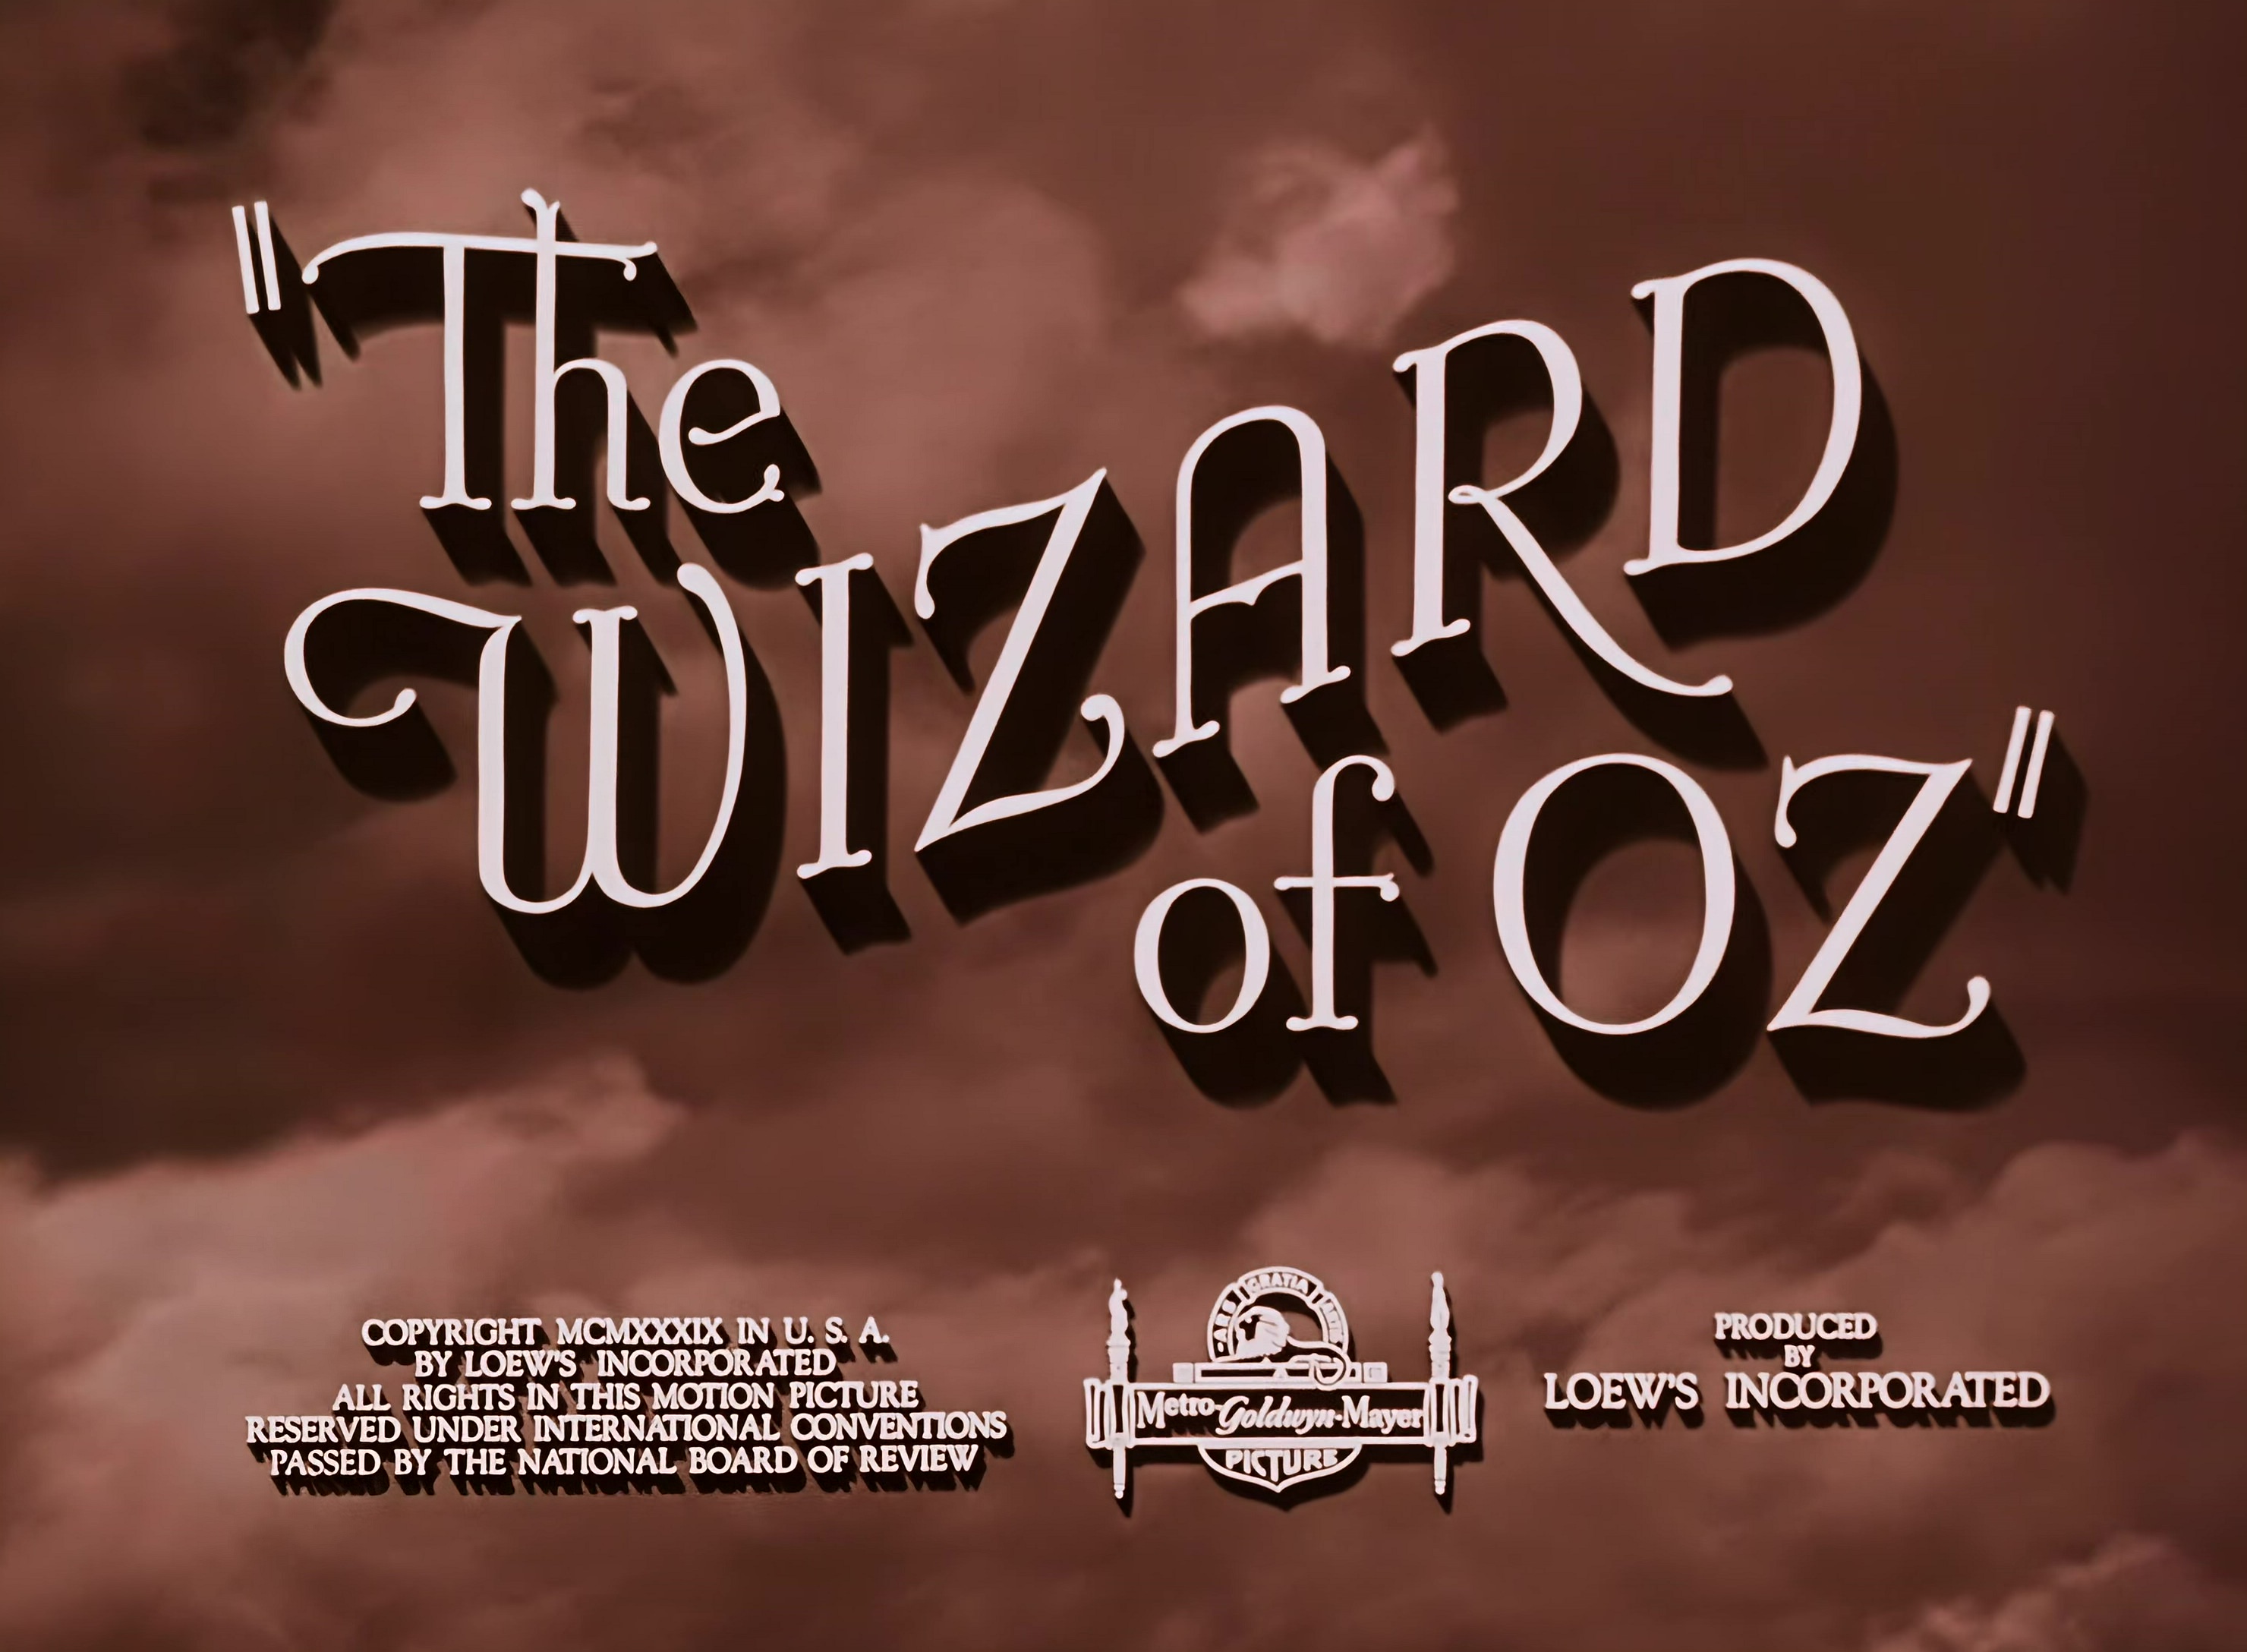 The Wizard of Oz (1939) | Film and Television Wikia | FANDOM powered by Wikia